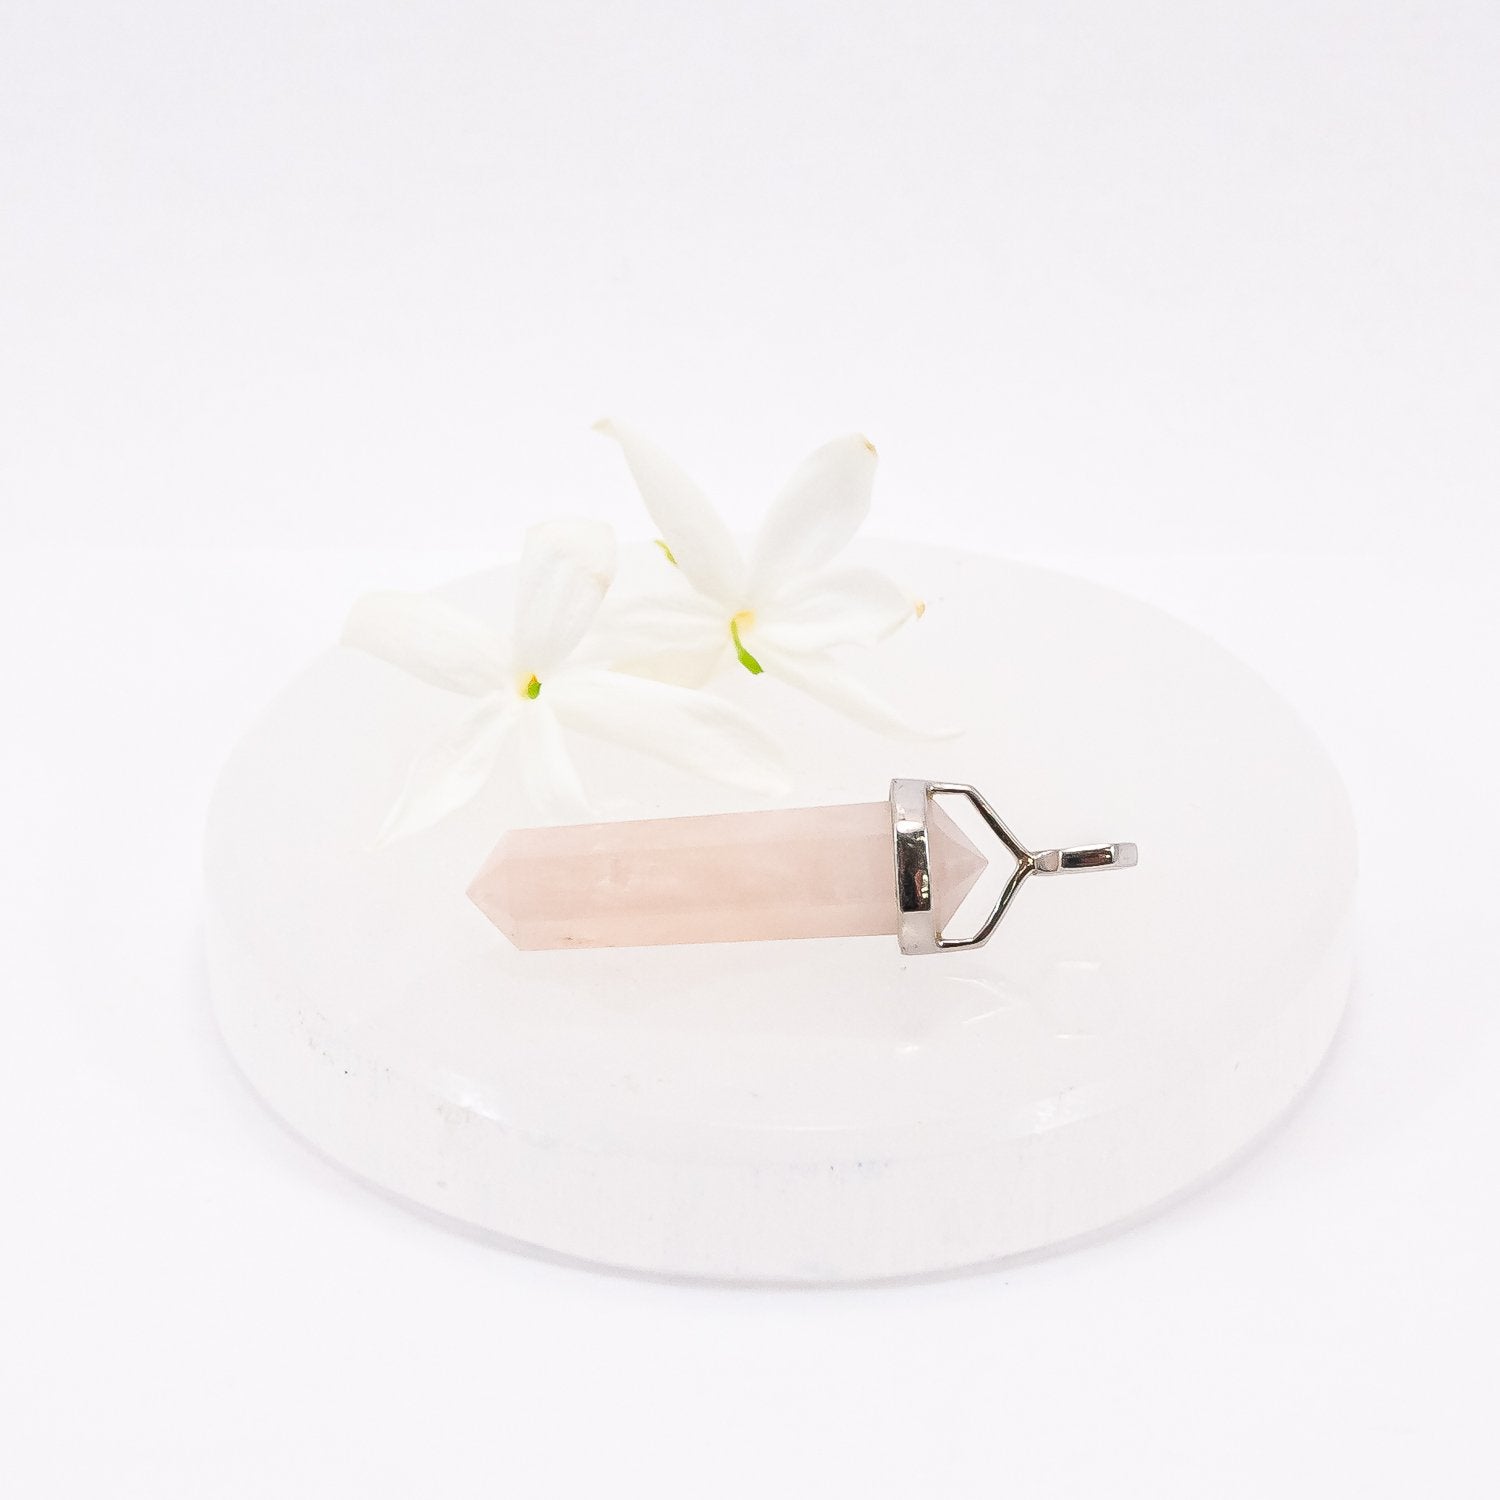 Morganite crystal pendant necklace on selenite plate with flowers.